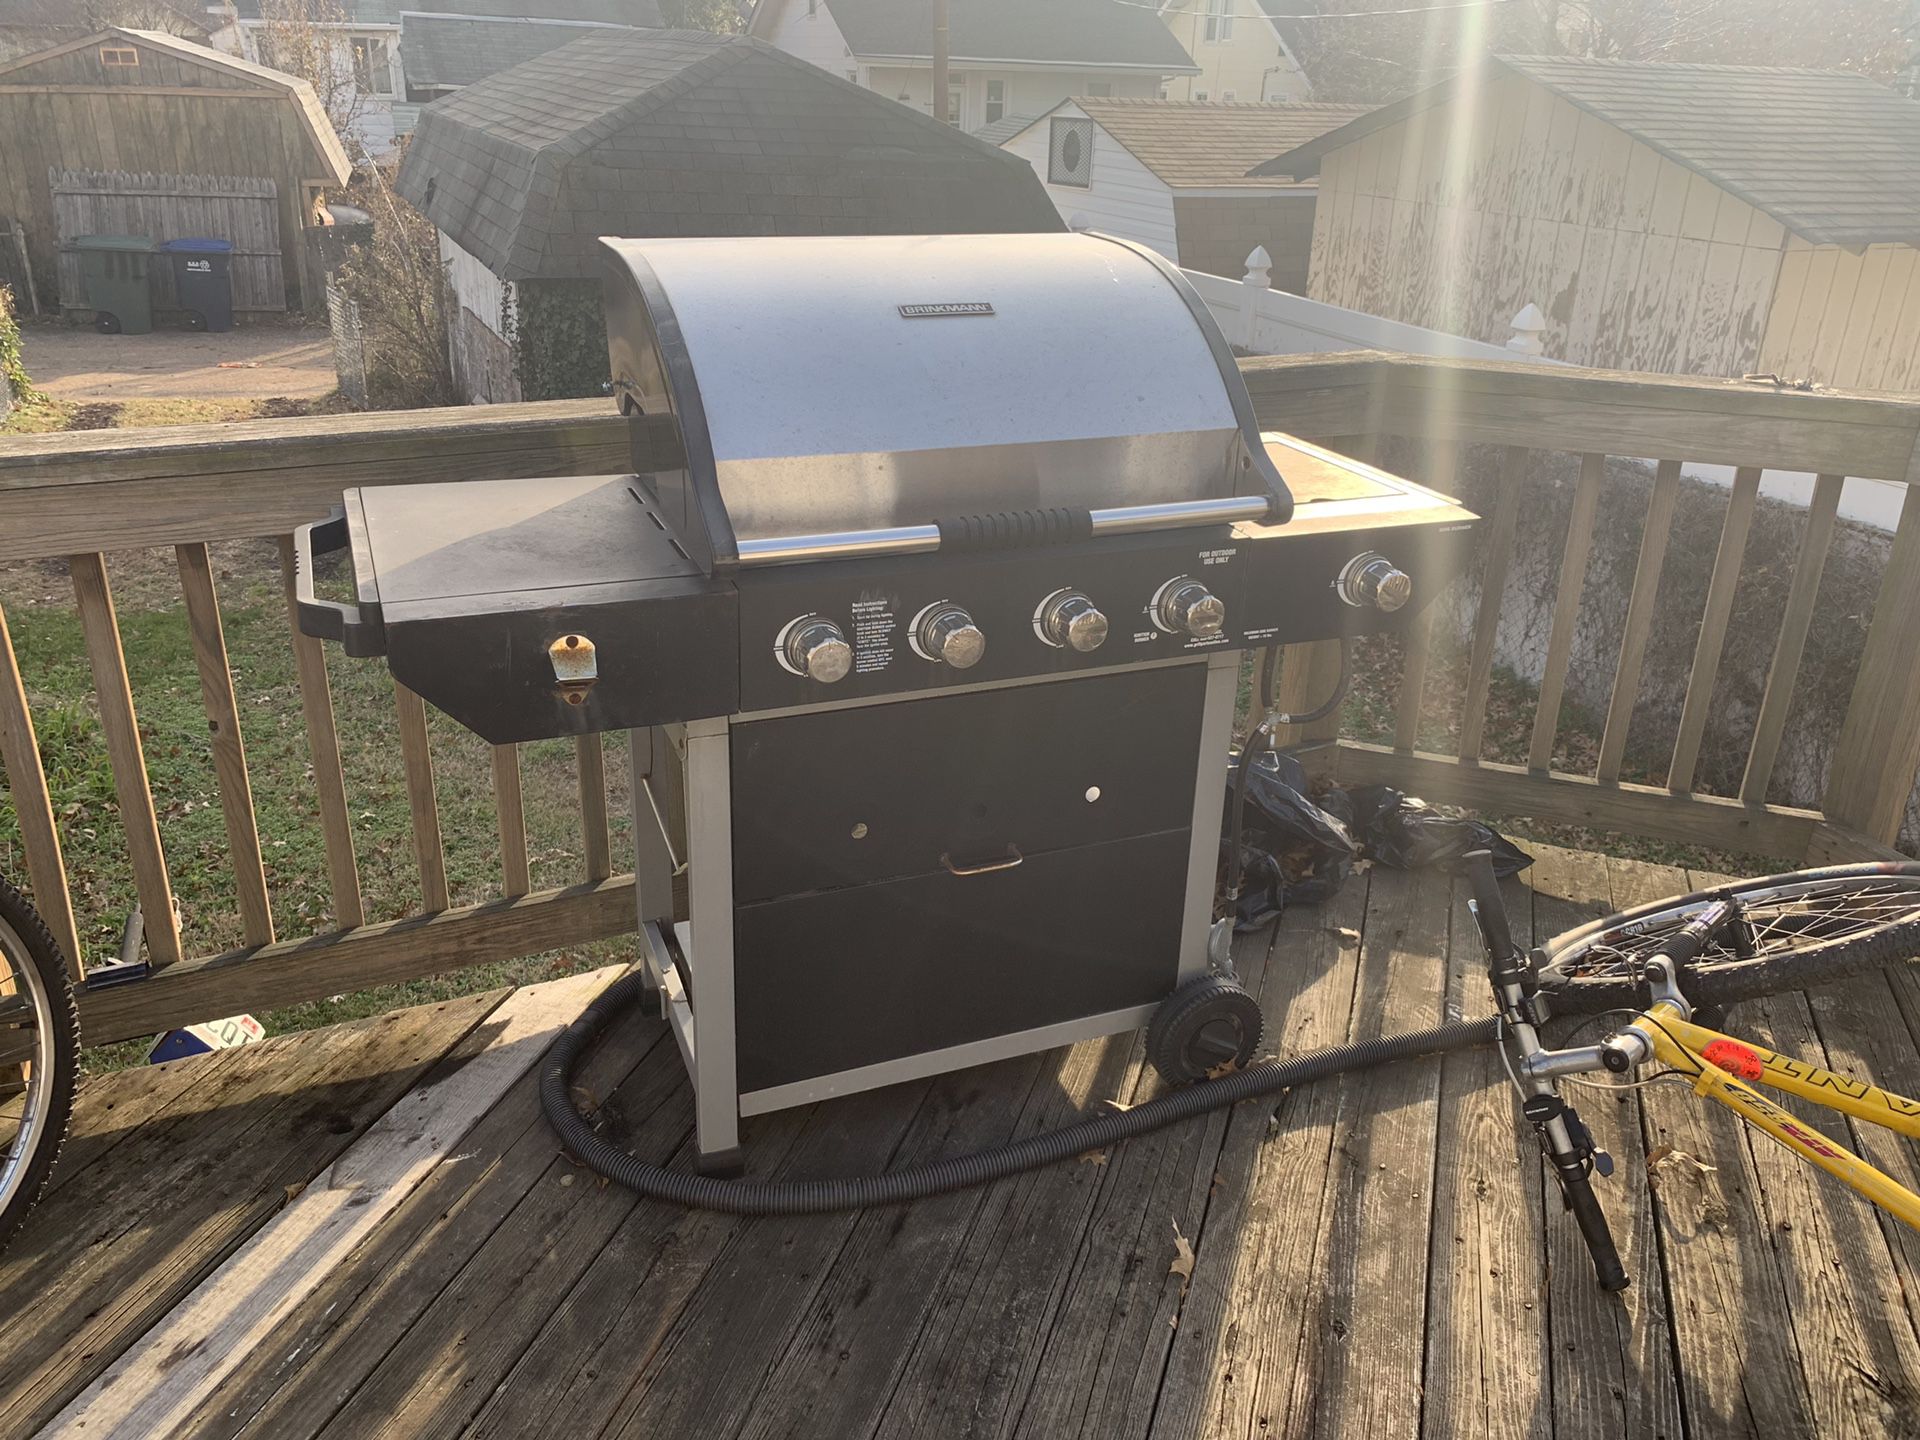 BBQ. Works fine. Does not come with propane tank.